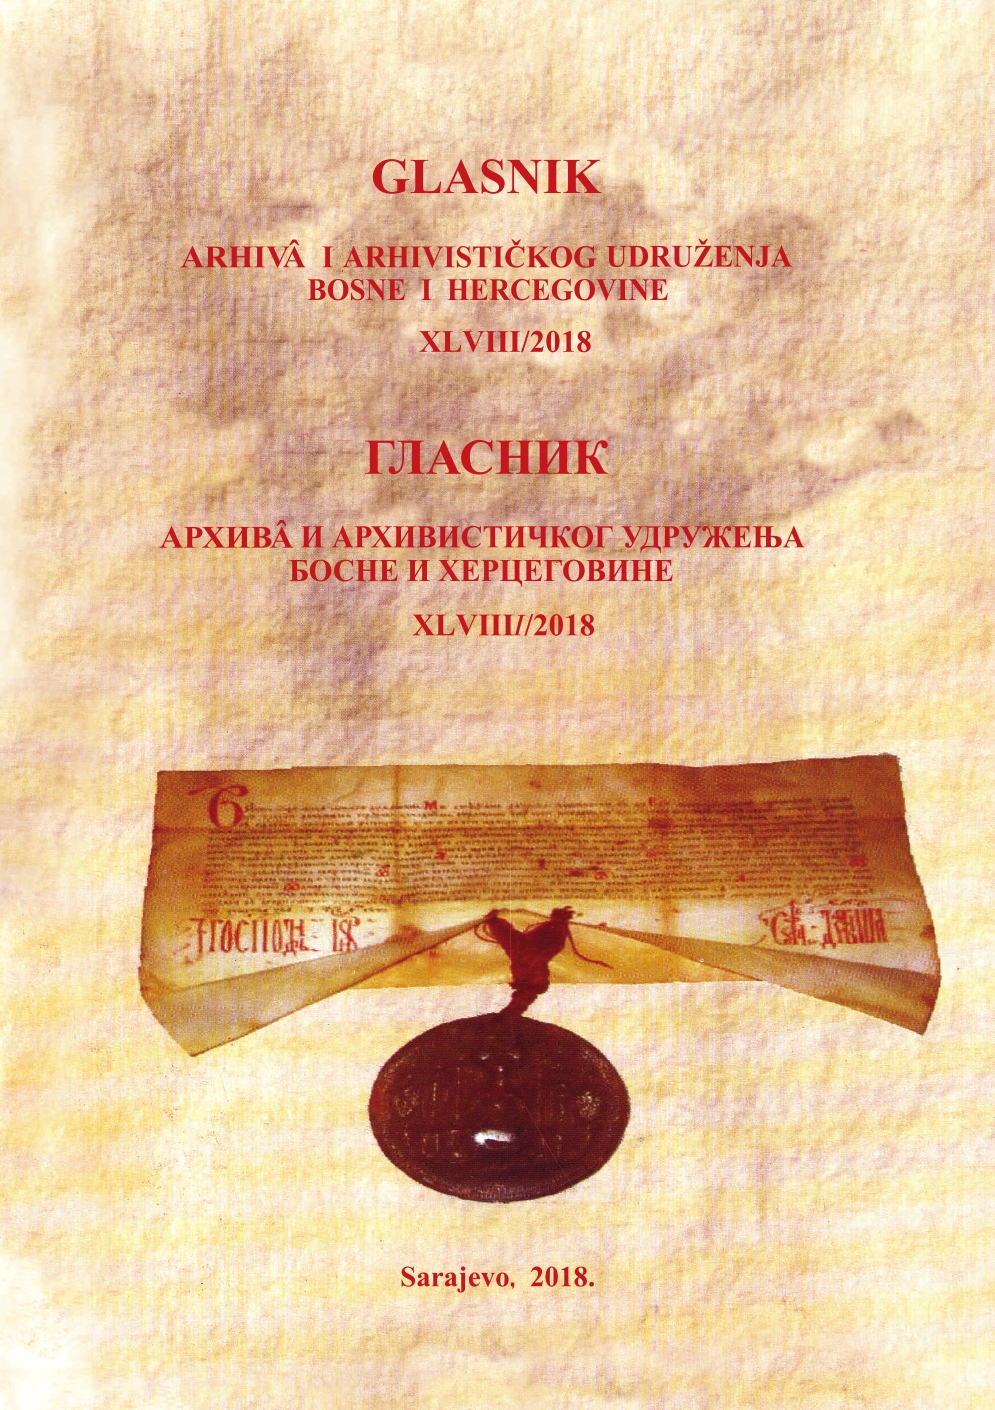 IT EQUIPMENT AND SYSTEMS IN ARCHIVES OF BOSNIA AND HERZEGOVINA WITH FOCUS OF THE ARCHIVES OF TUZLA CANTON  - status and requirements - Cover Image